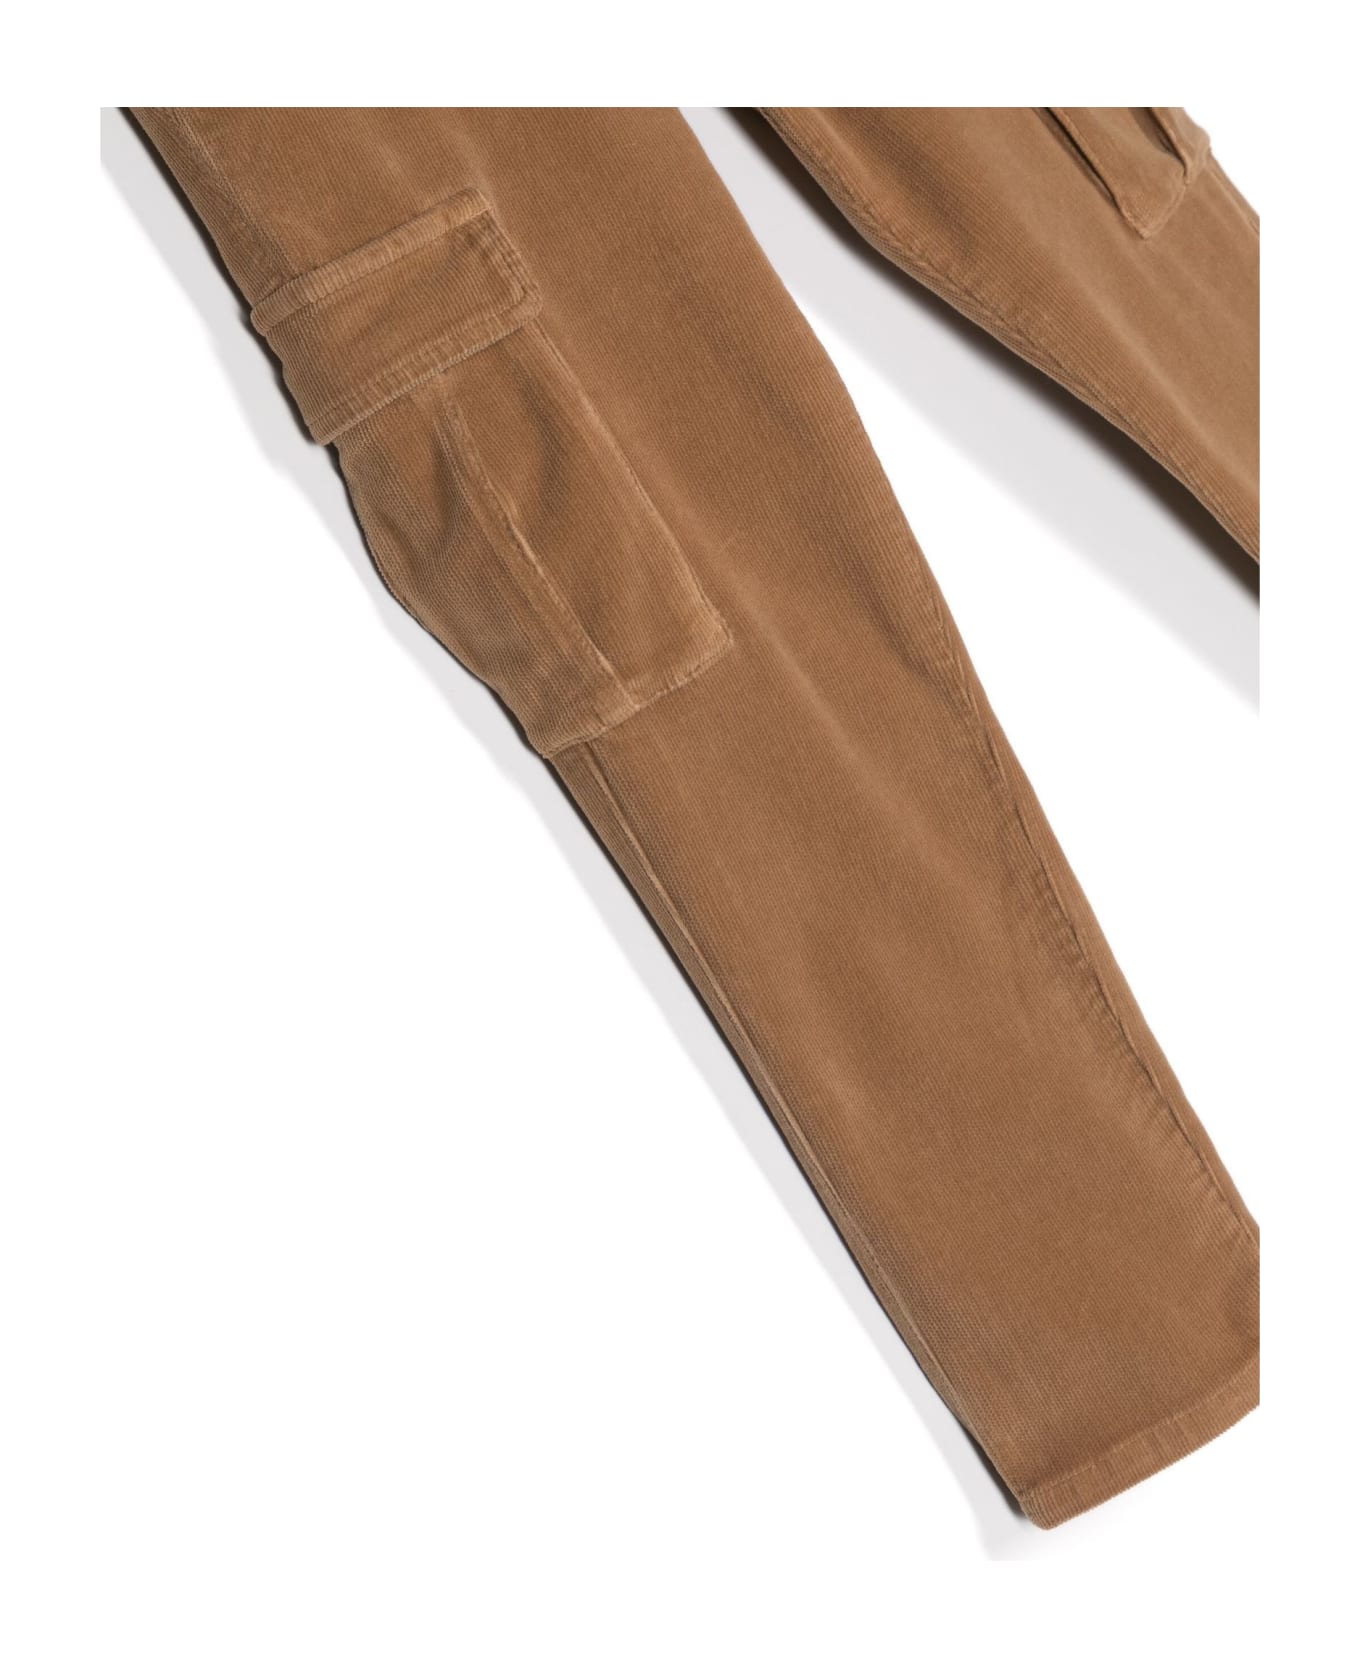 Fay Trousers Brown - Brown